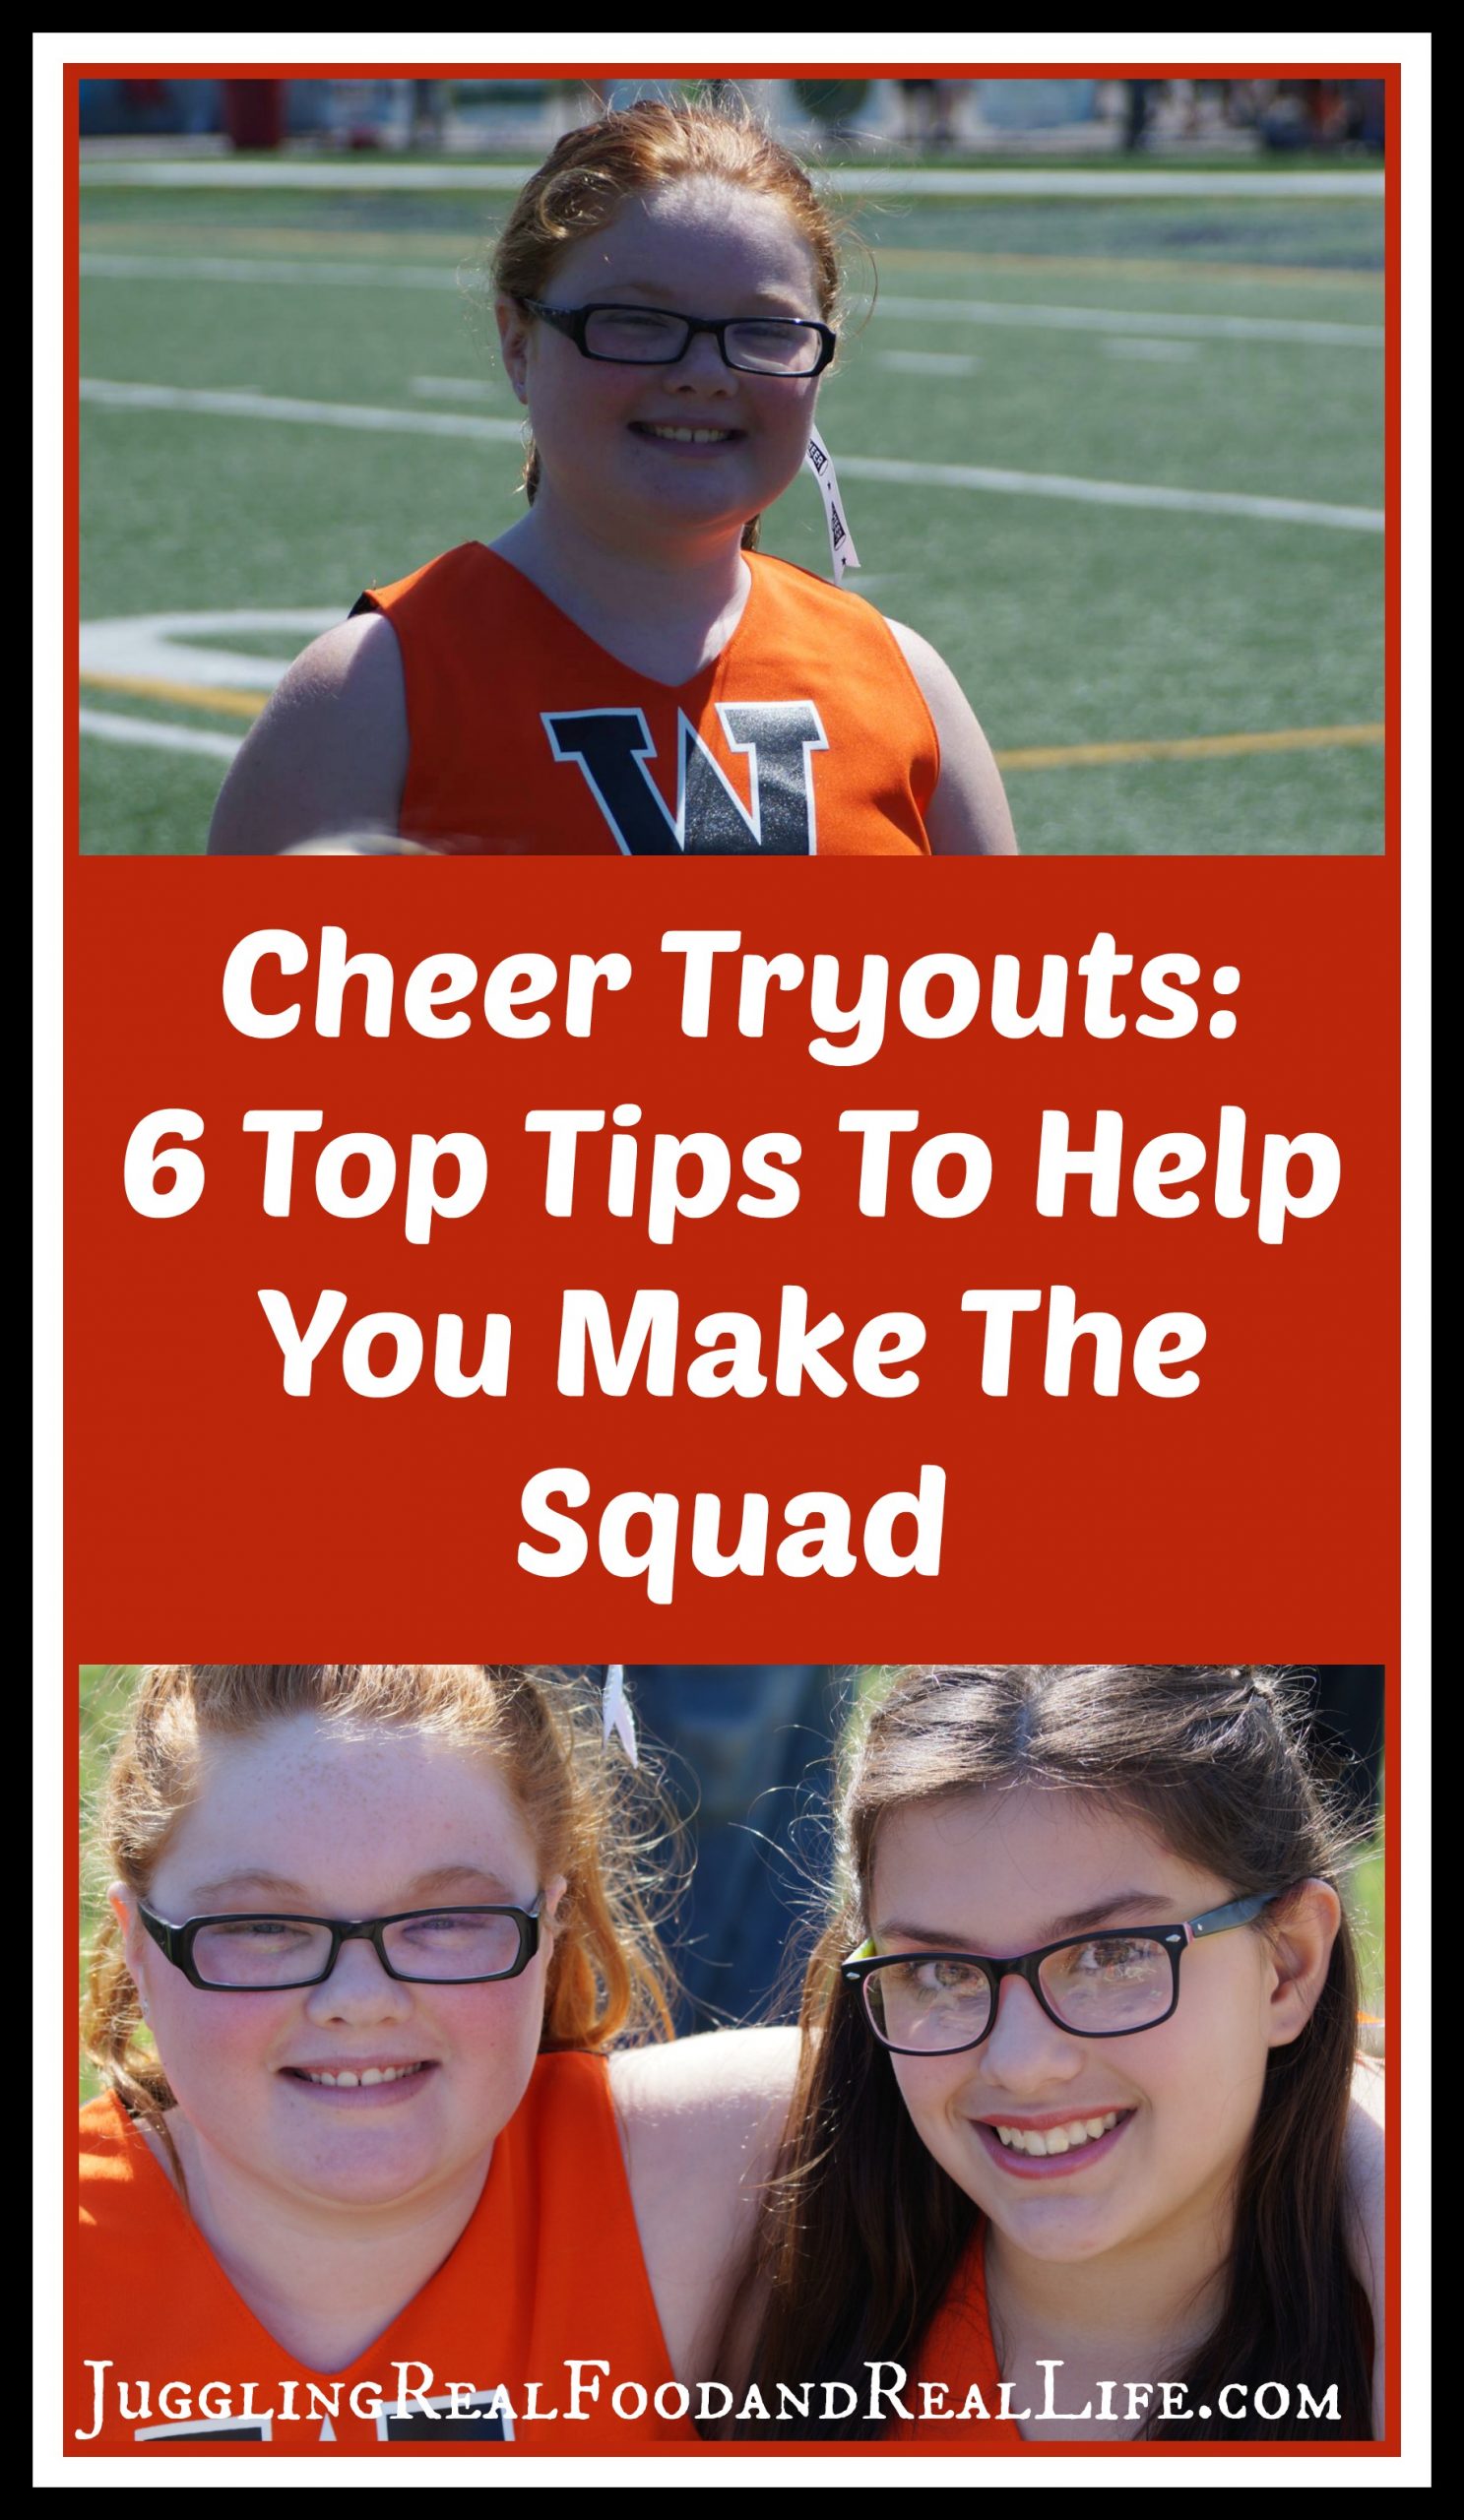 Cheer Tryouts: 6 Top Tips To Help You Make The Squad